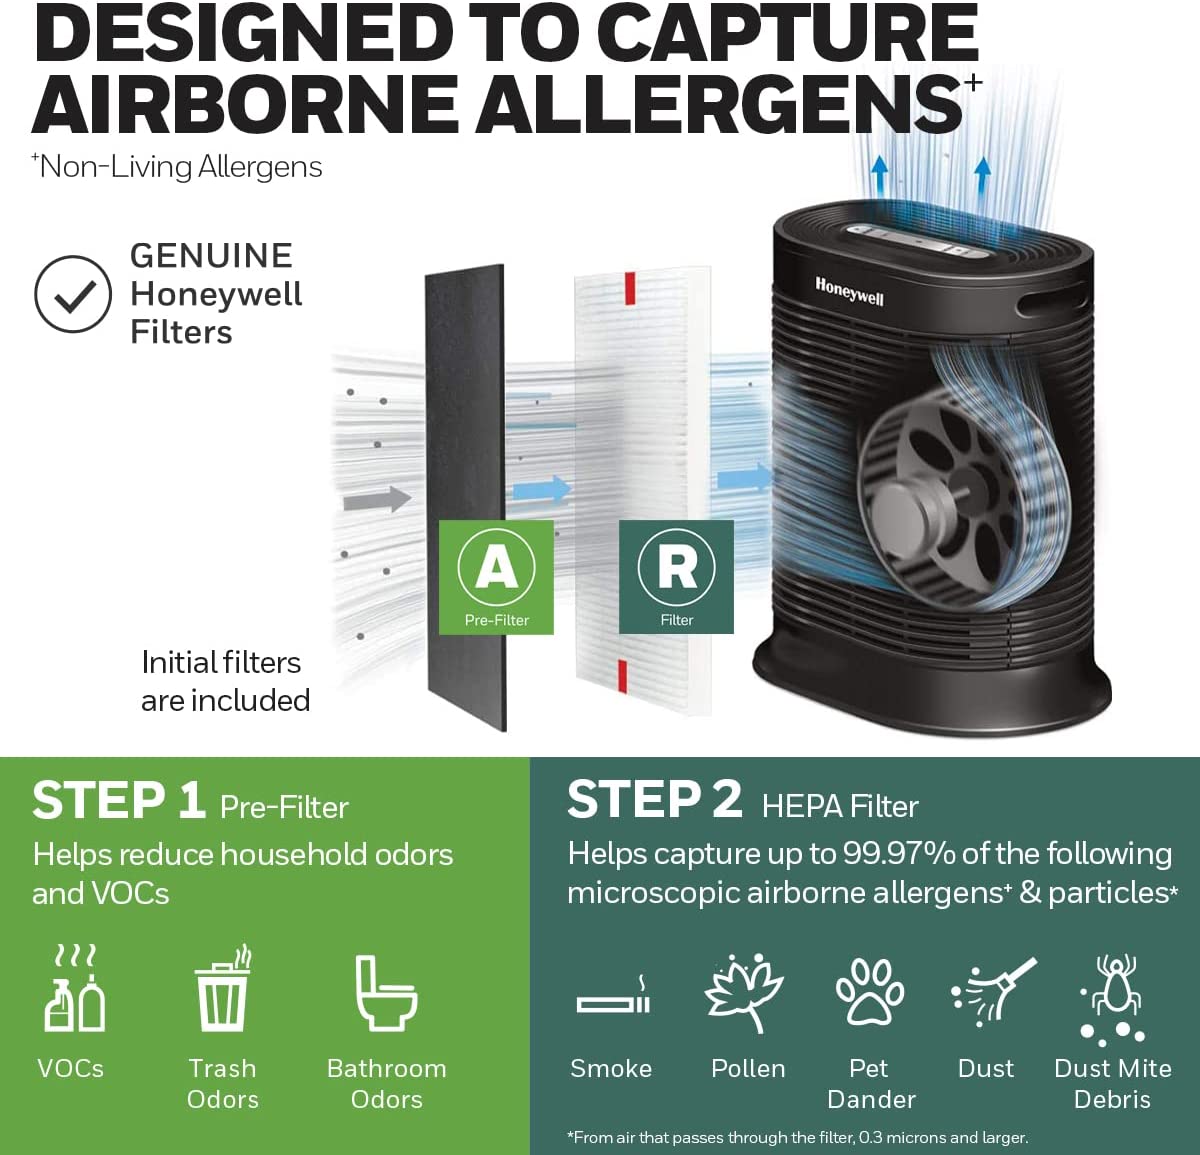 Honeywell HPA300 HEPA Air Purifier for Extra Large Rooms Microscopic  Airborne Allergen+ Reducer Cleans Up To 2250 Sq Ft in Hour Wildfire/Smoke  Pollen Pet Dander and Dust Air Pur